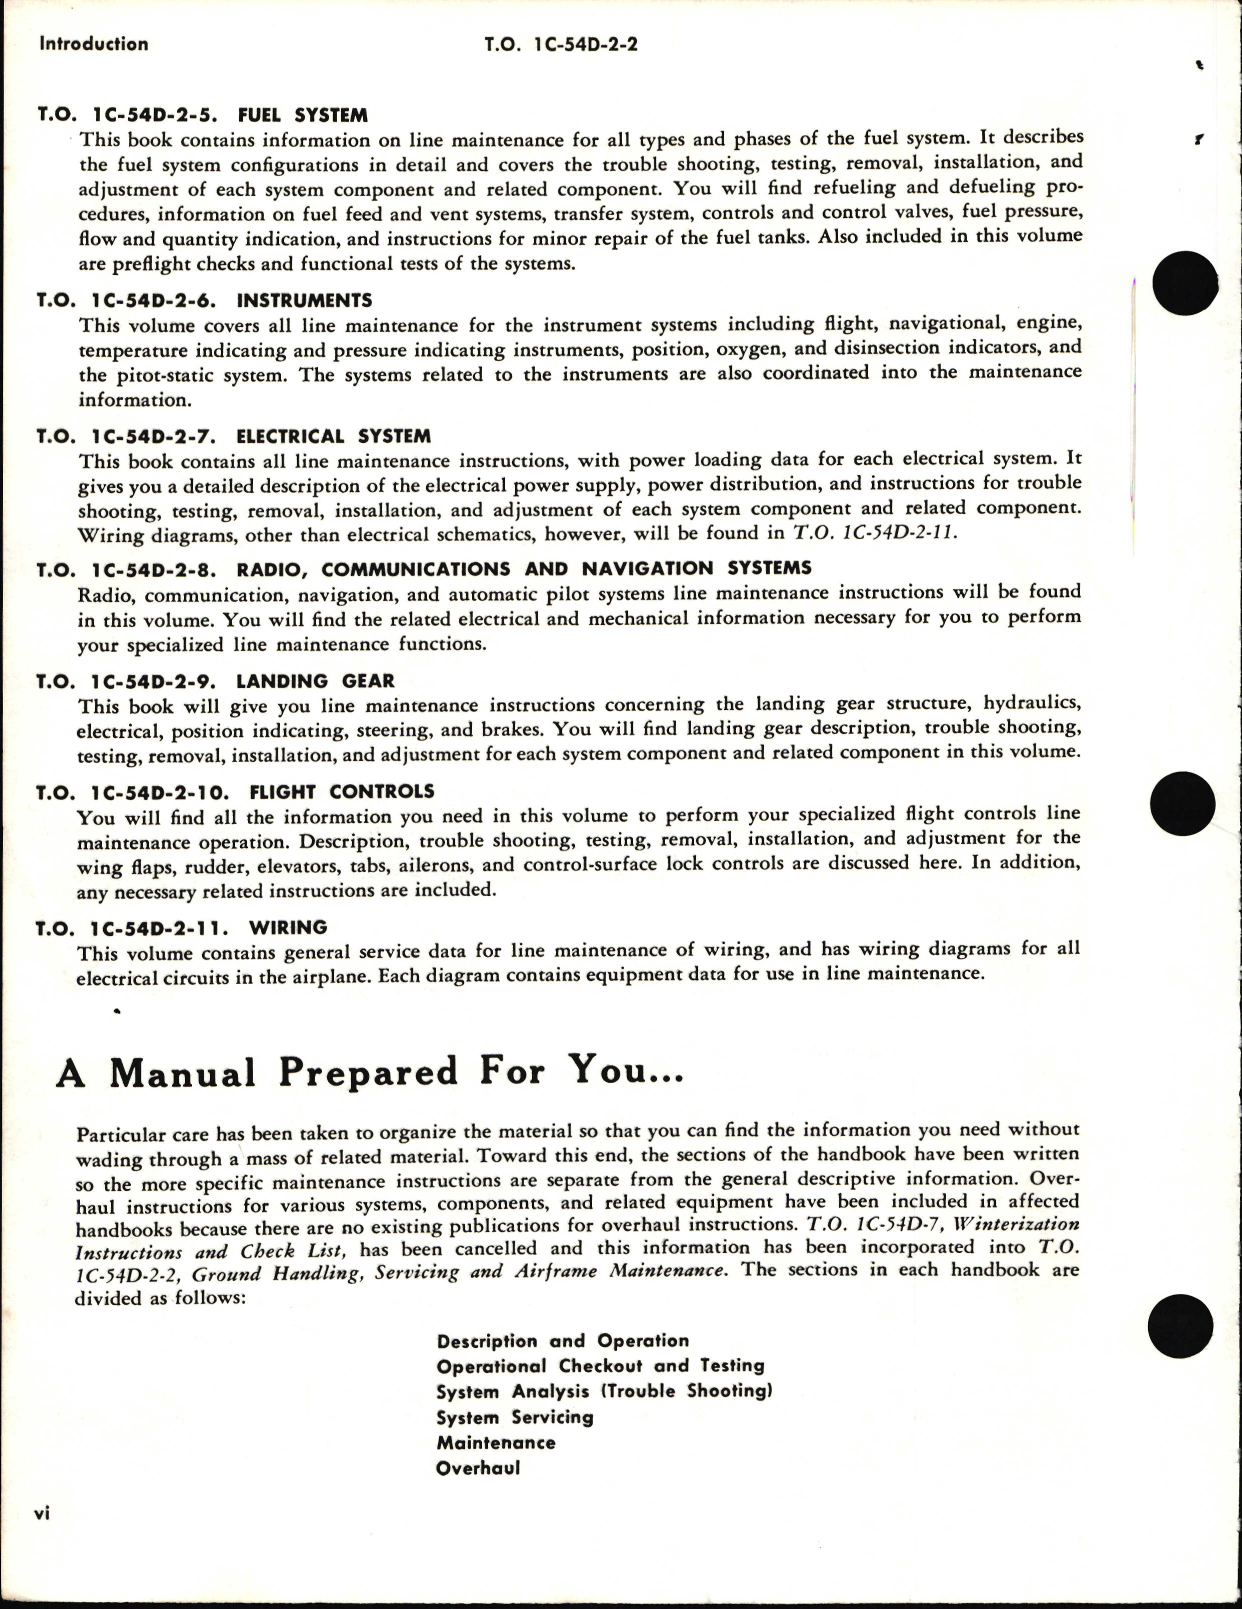 Sample page 8 from AirCorps Library document: Maintenance Instructions, Ground Handling, Servicing, and Airframe Maintenance for C-54D, D-54G, C-54E, and C-54M